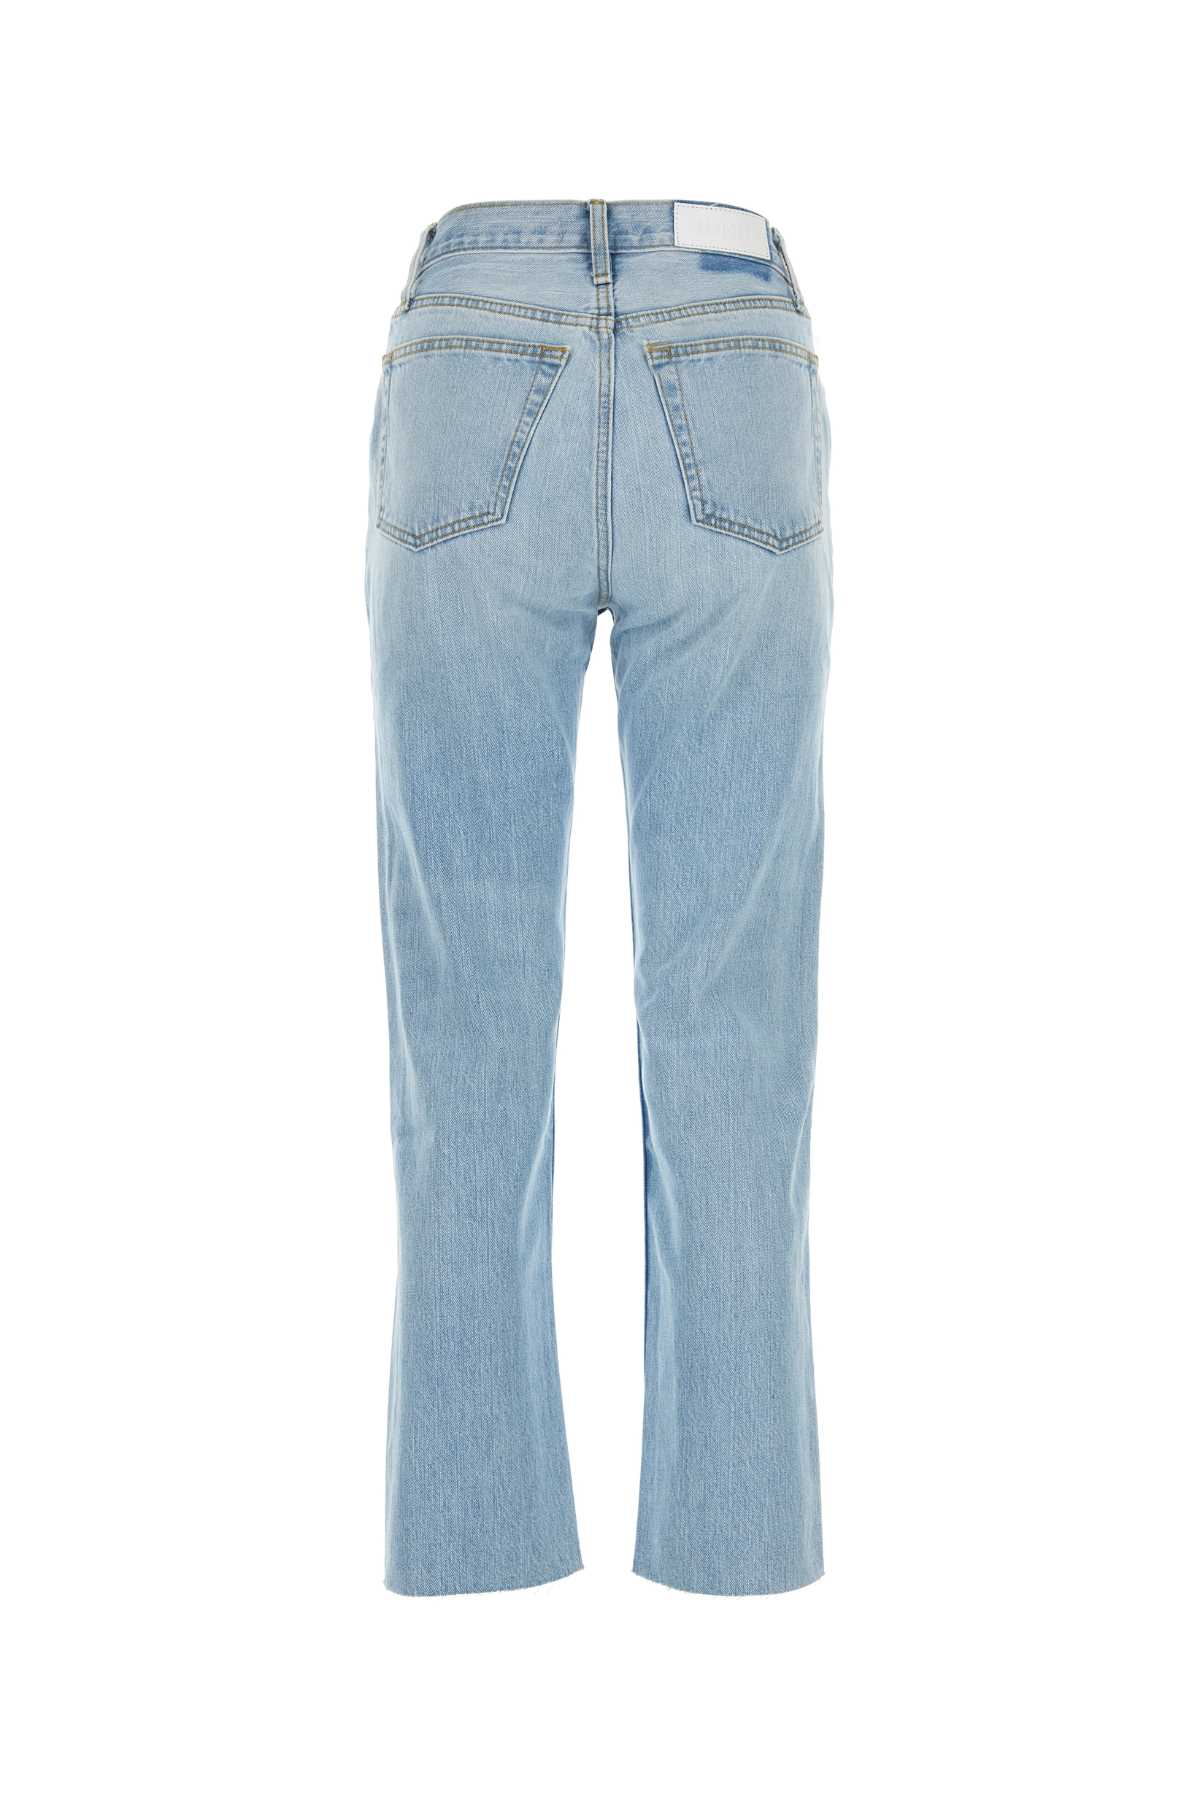 Re/done Denim Jeans In Surfbluedestroyed